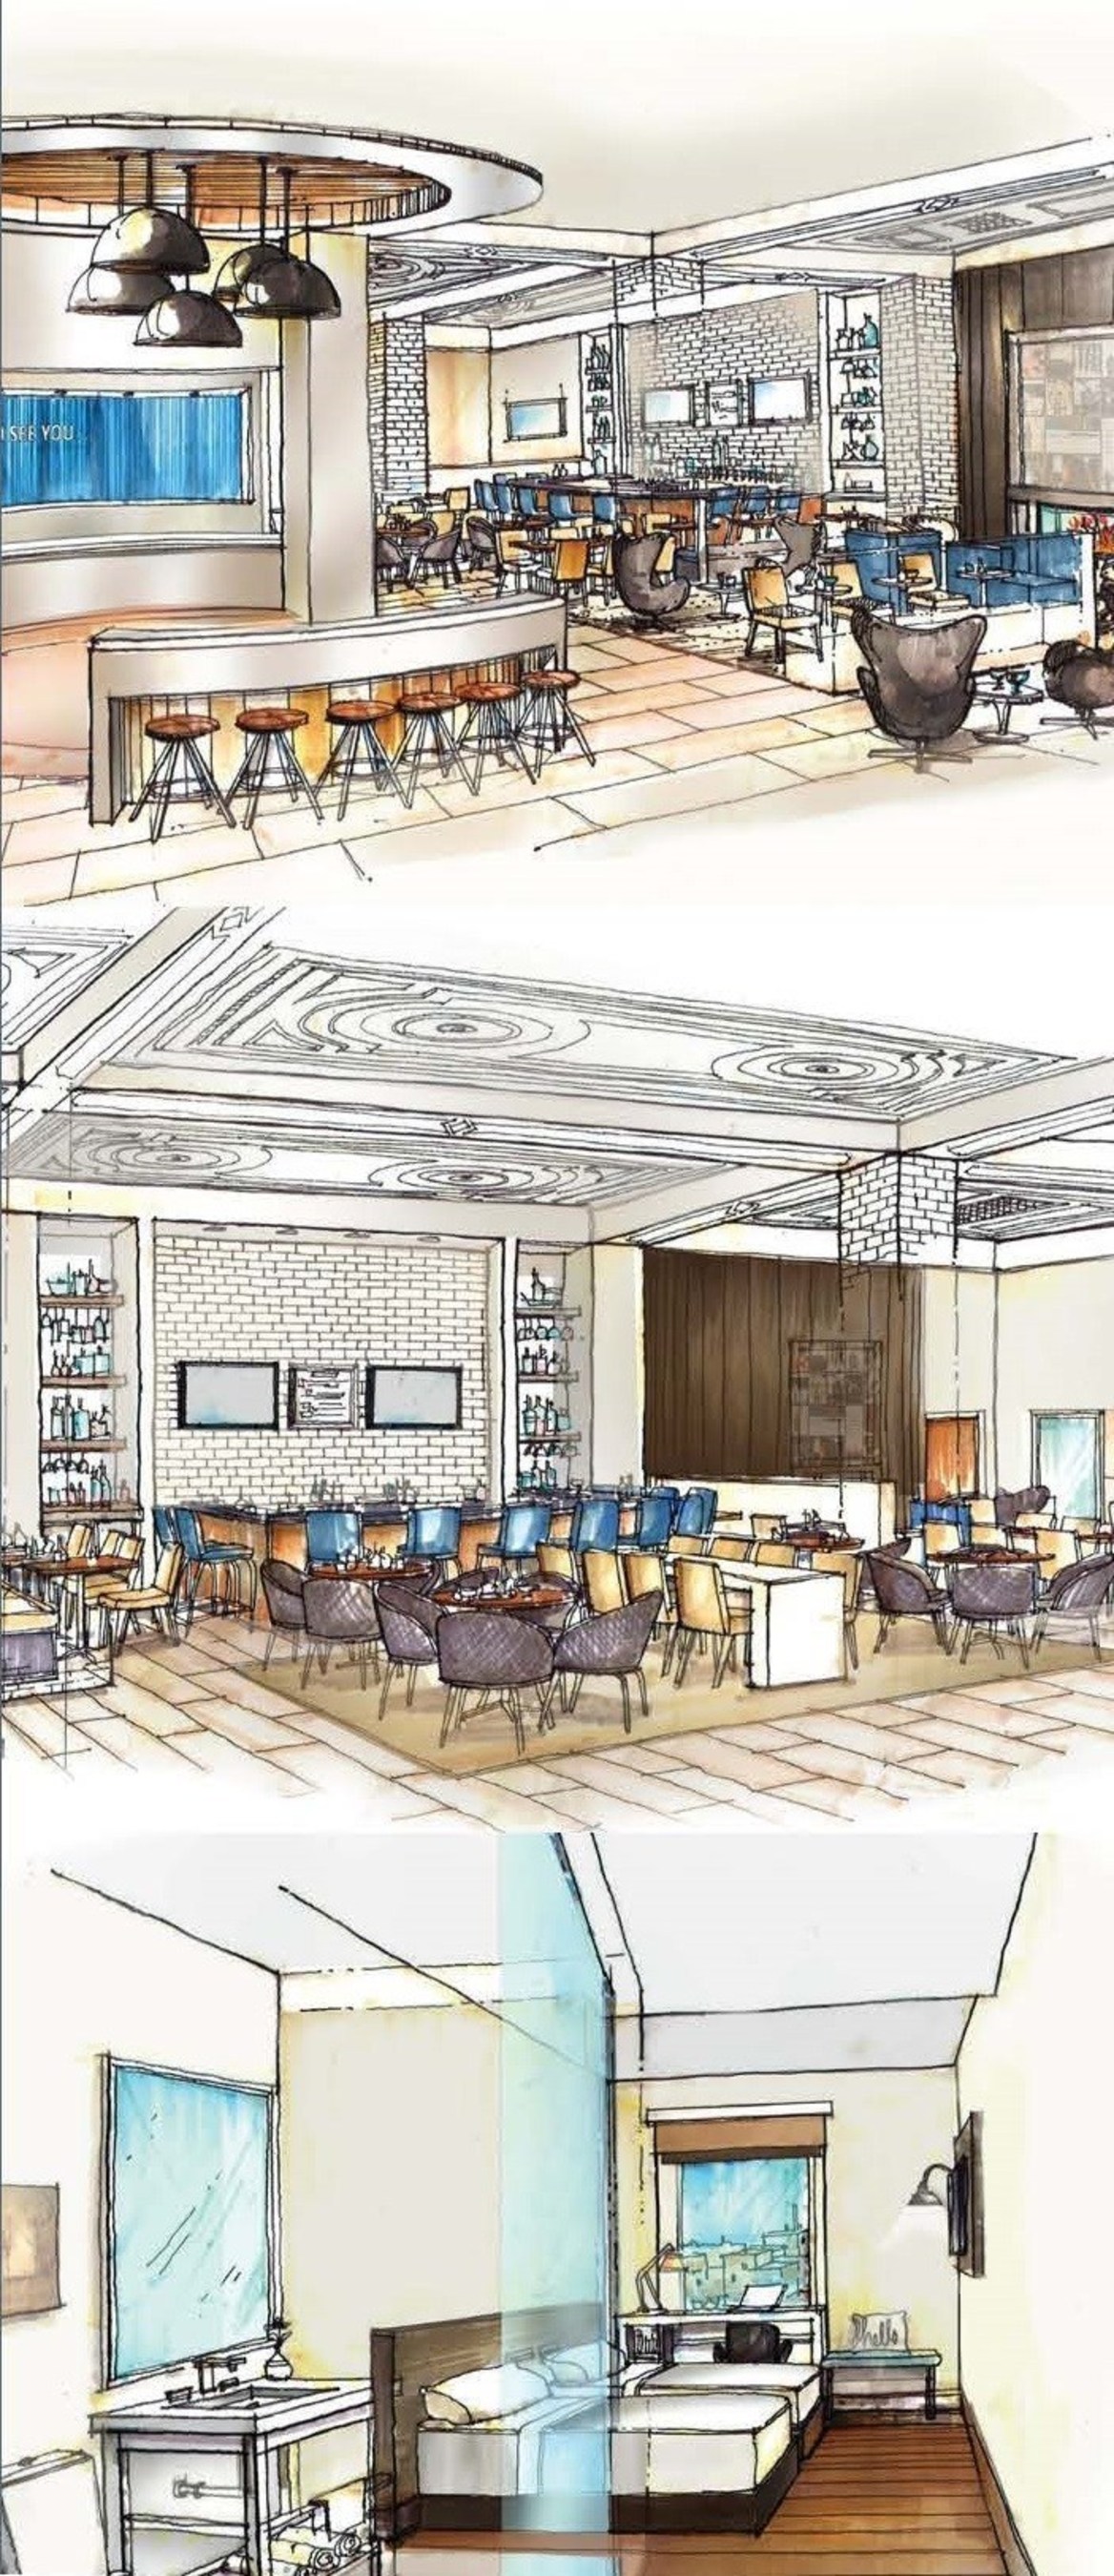 Renderings of Social Circle(TM), lobby and guest room at future Cambria hotels & suites Chicago - City Center.  (Note that all three renderings are part of one image)